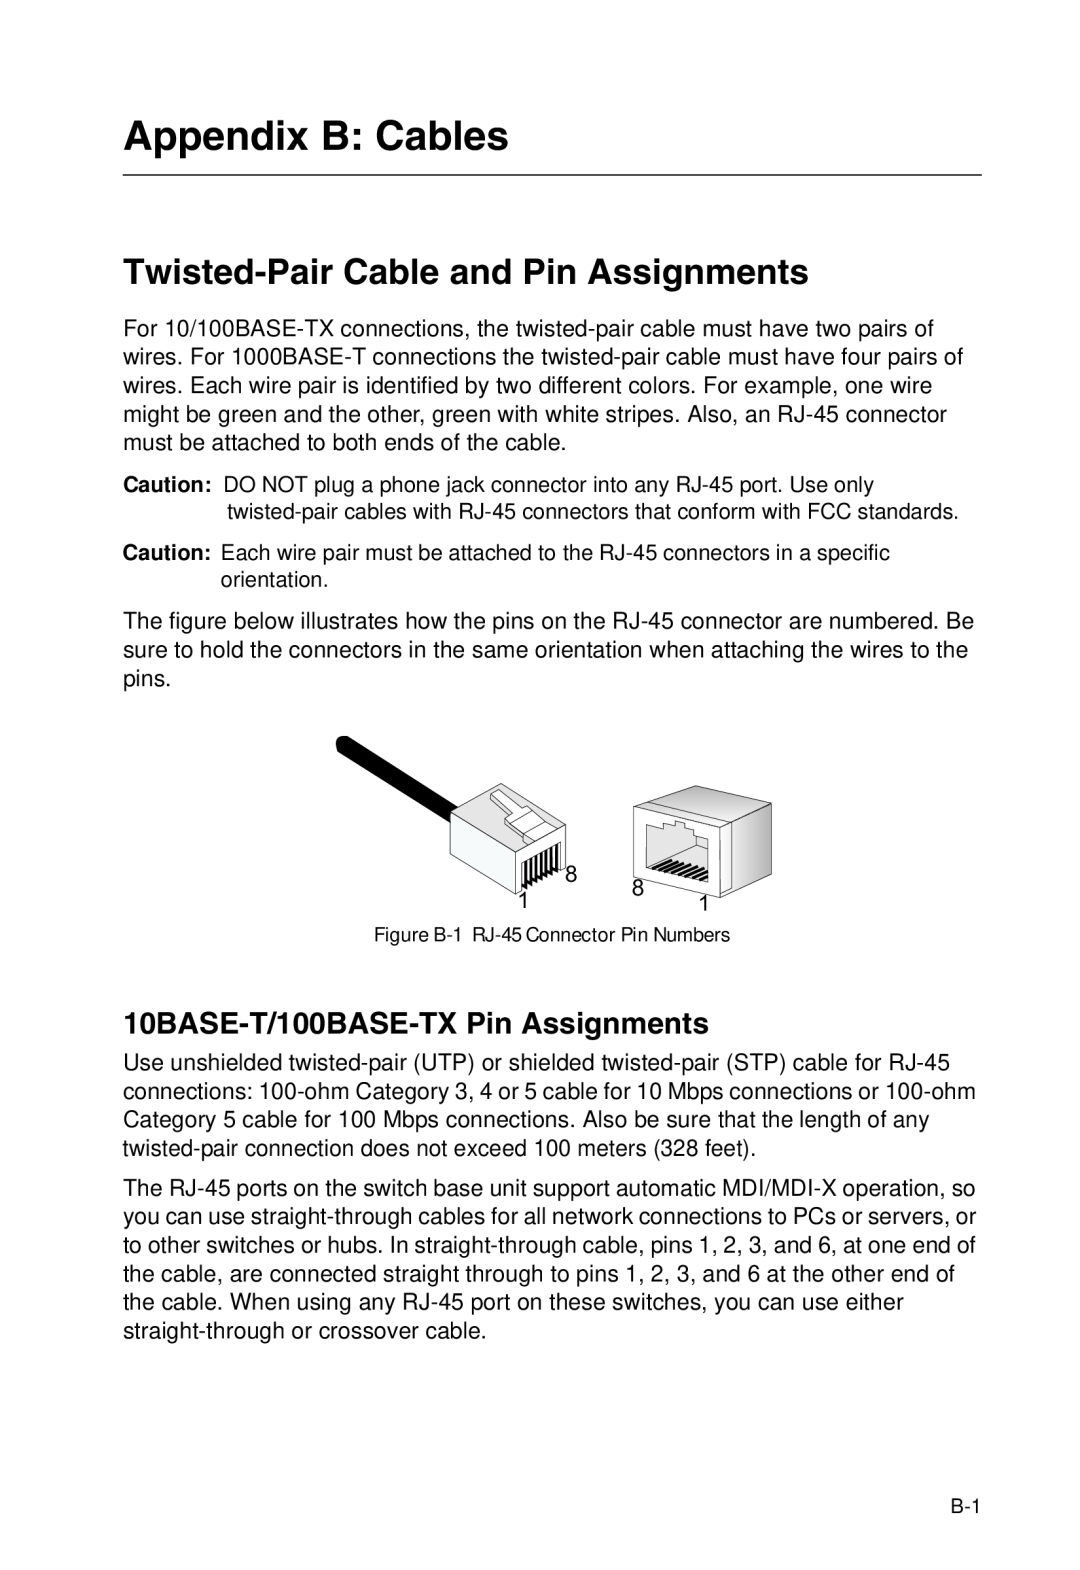 SMC Networks SMC8950EM Appendix B Cables, Twisted-Pair Cable and Pin Assignments, 10BASE-T/100BASE-TX Pin Assignments 